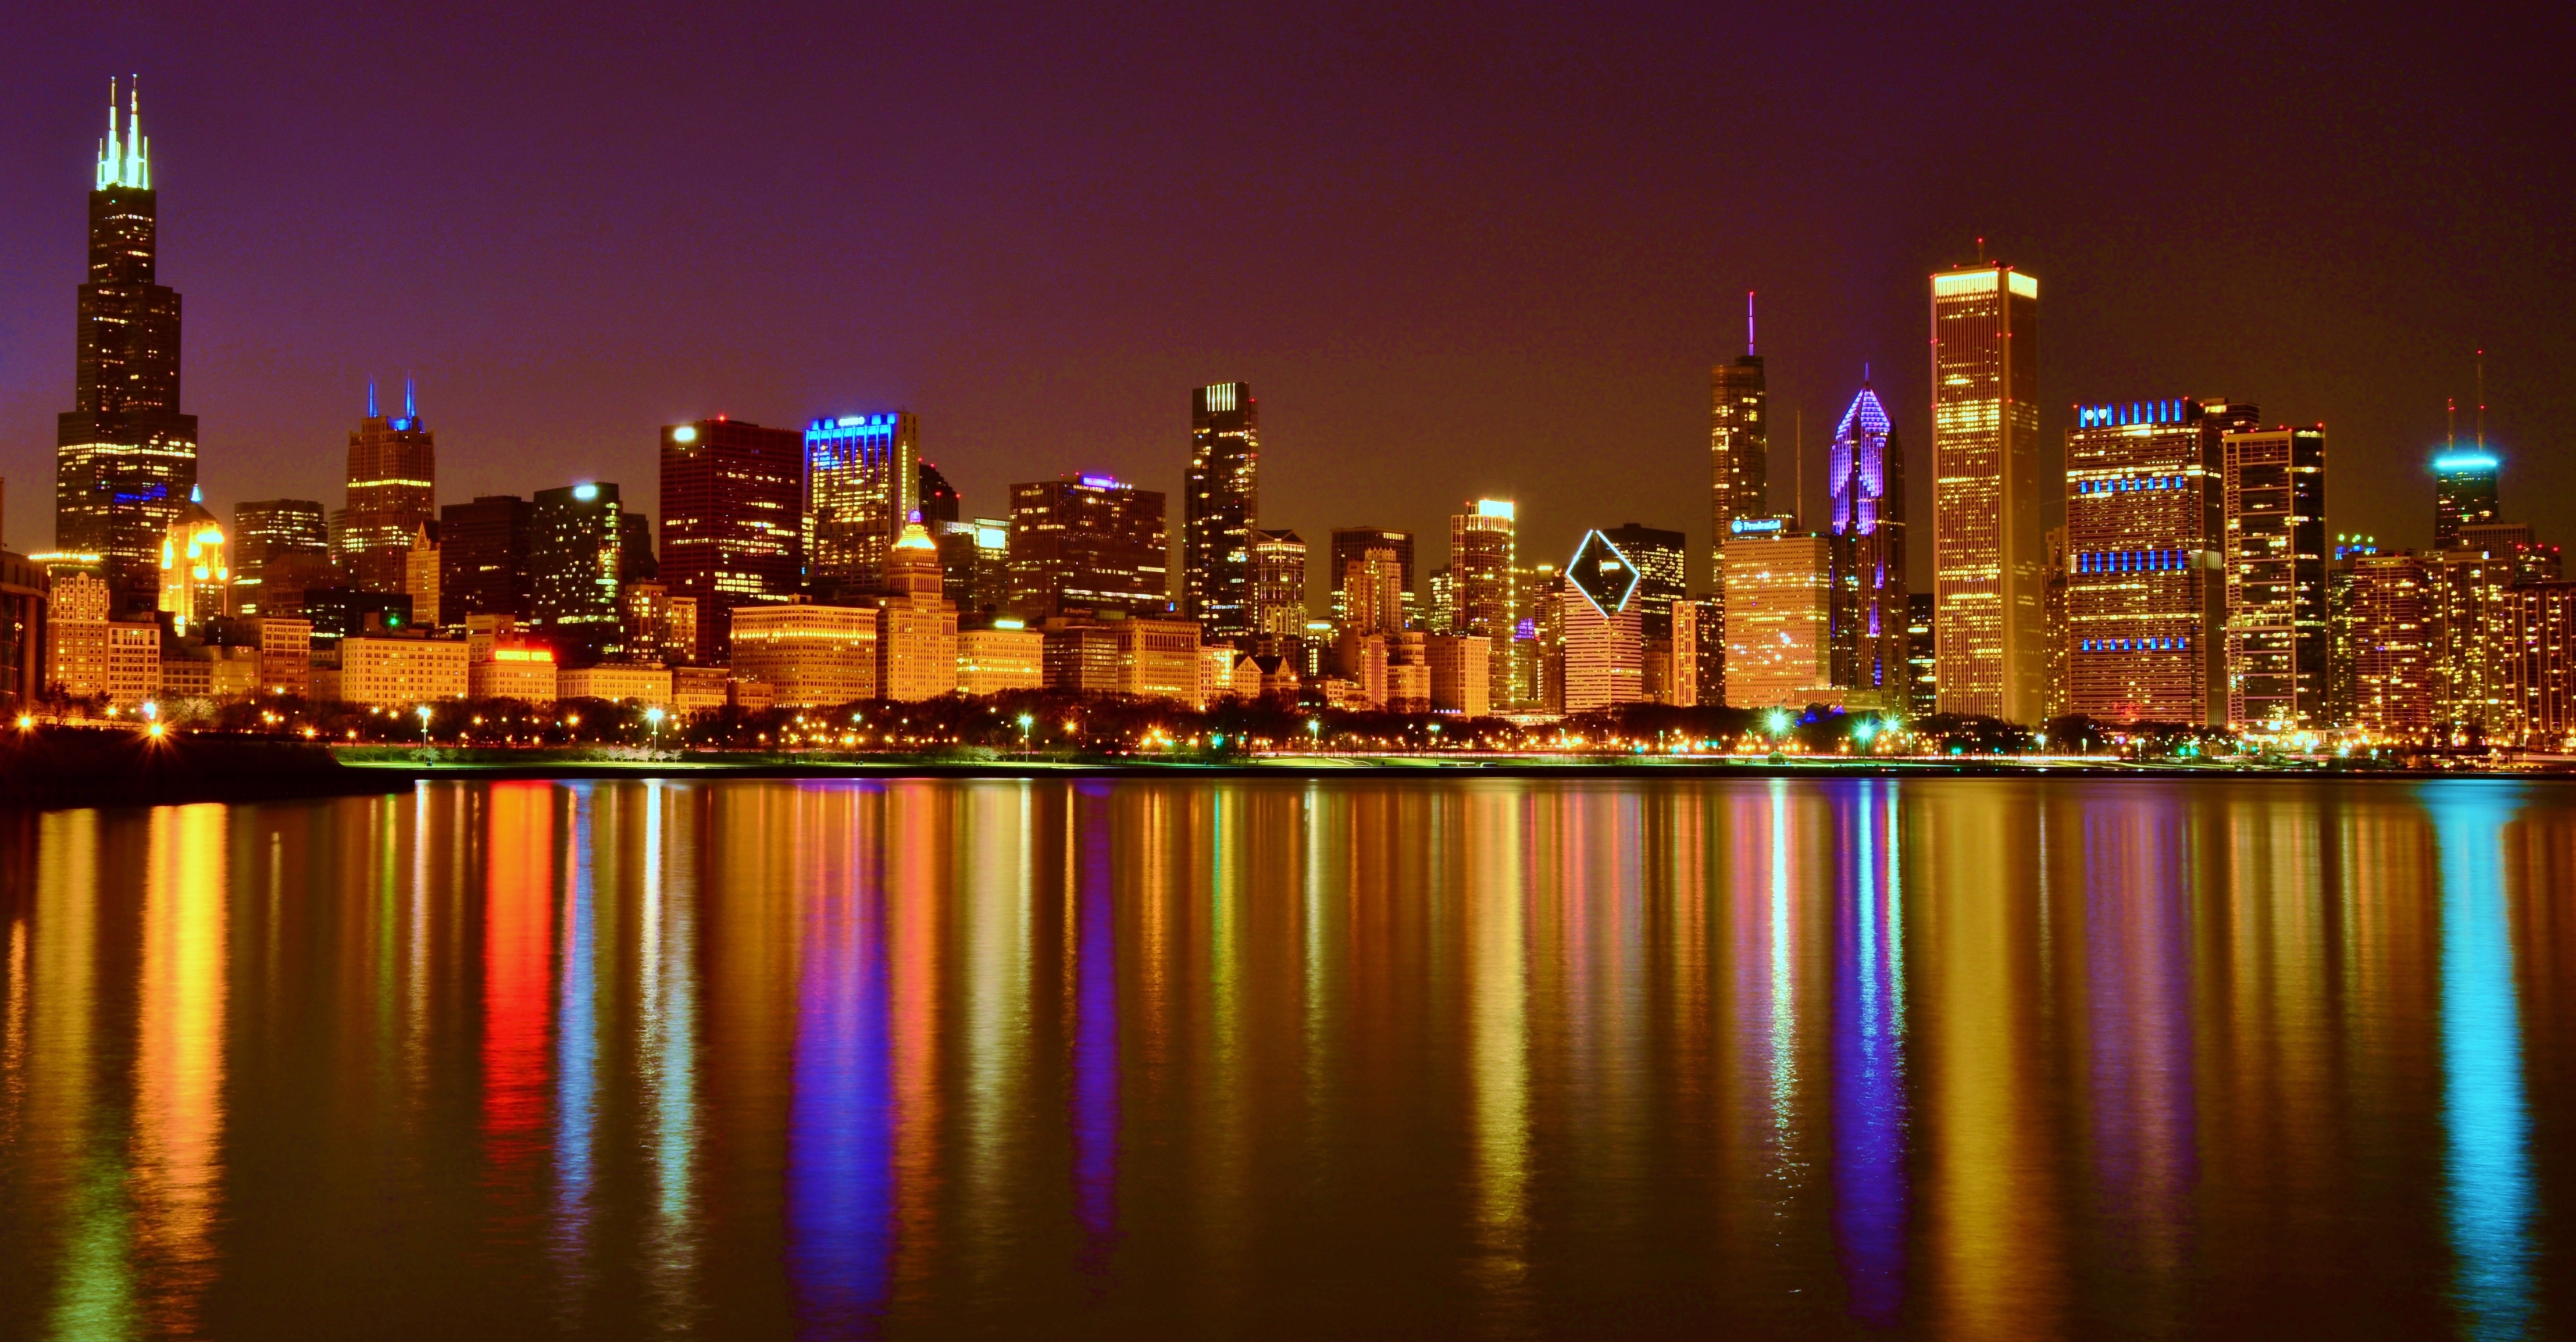 Chicago in Focus | 'Downtown Chicago at night' by Arturo Gonzalez